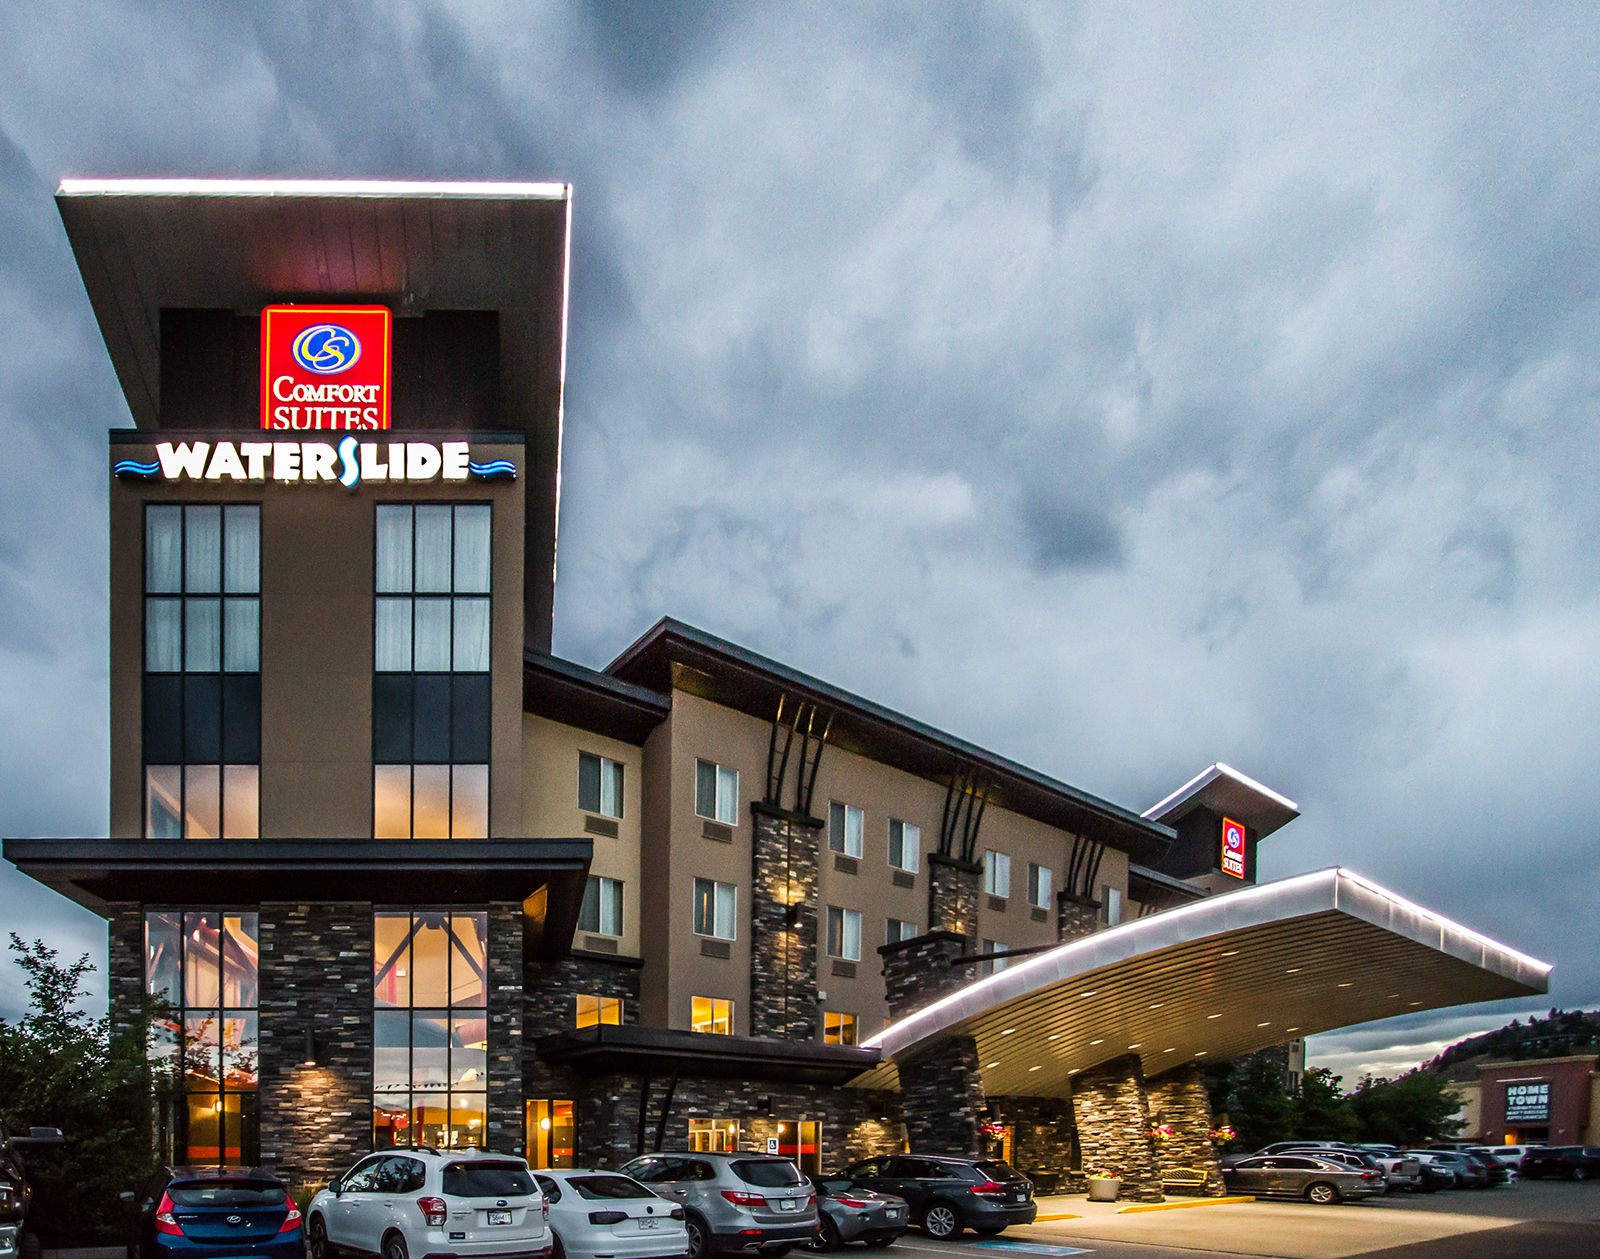 Comfort Suites Kelowna has been named as one of the top Choice hotels in Canada for hospitality and service